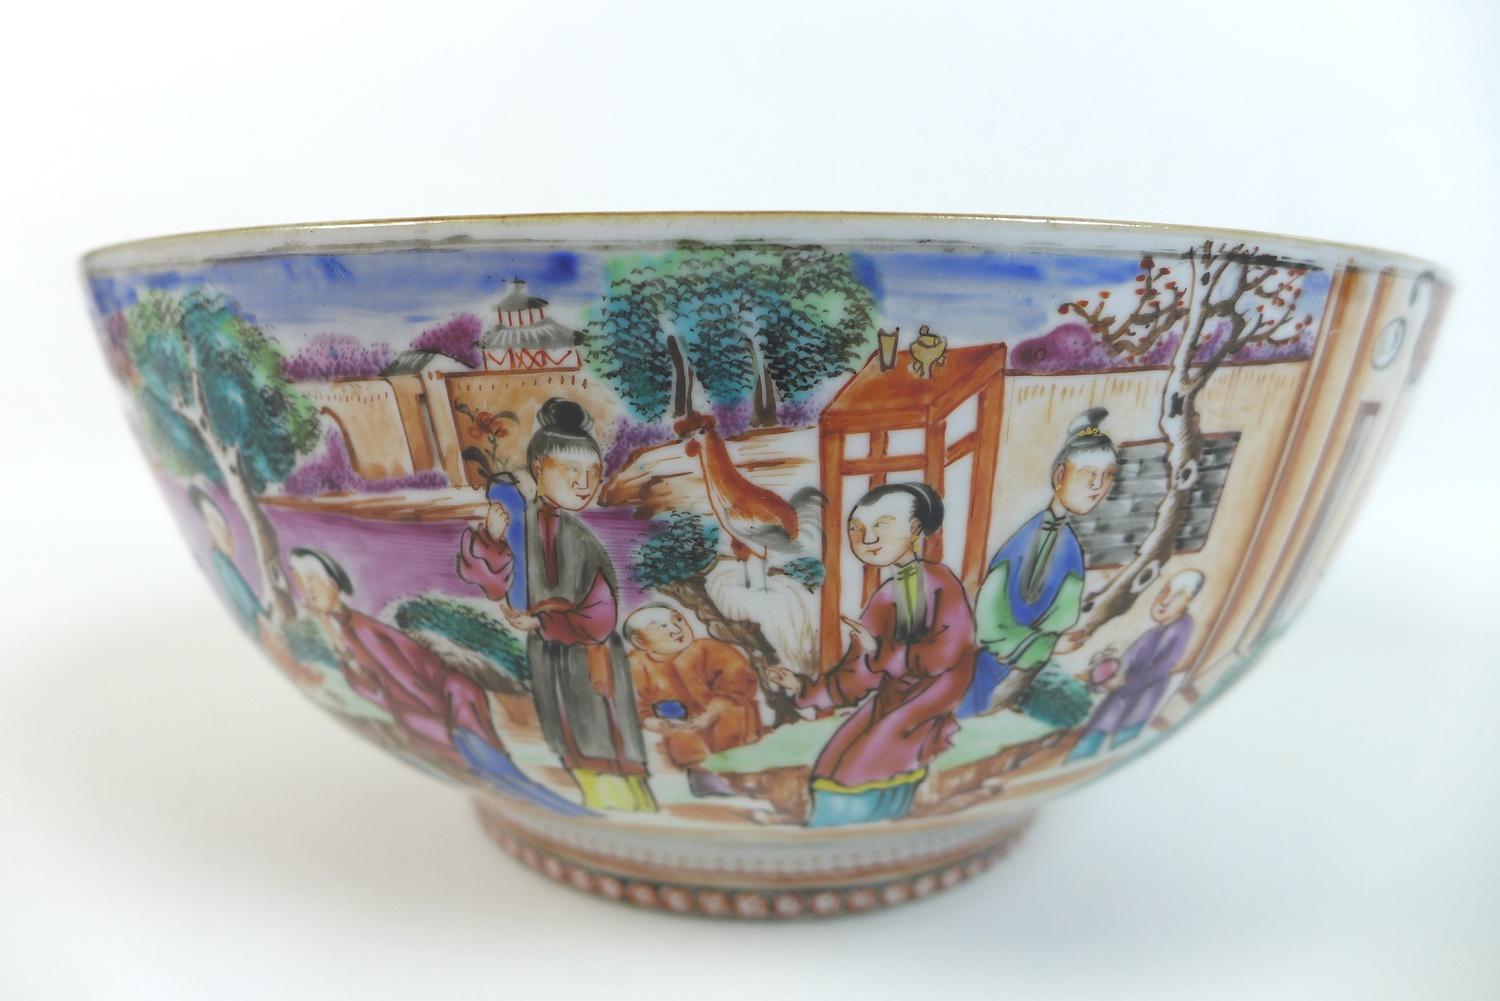 A Chinese Export porcelain famille rose punch bowl, Qing Dynasty, late 18th century, polychrome - Image 20 of 20